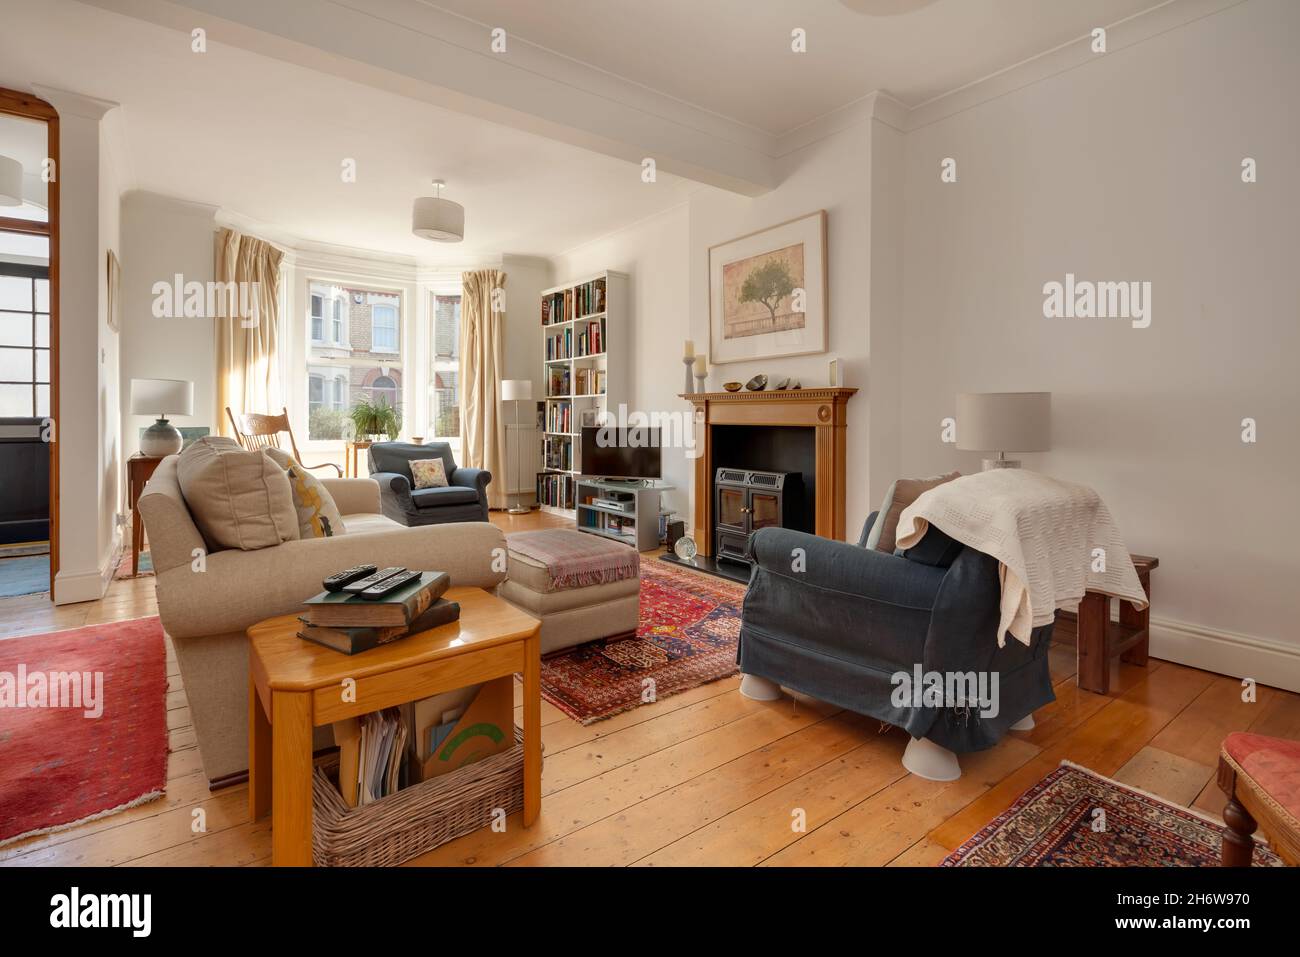 Cambridge, England - October 29 2019: Traditional bay fronted British living room retaining some original features including wooden floor Stock Photo